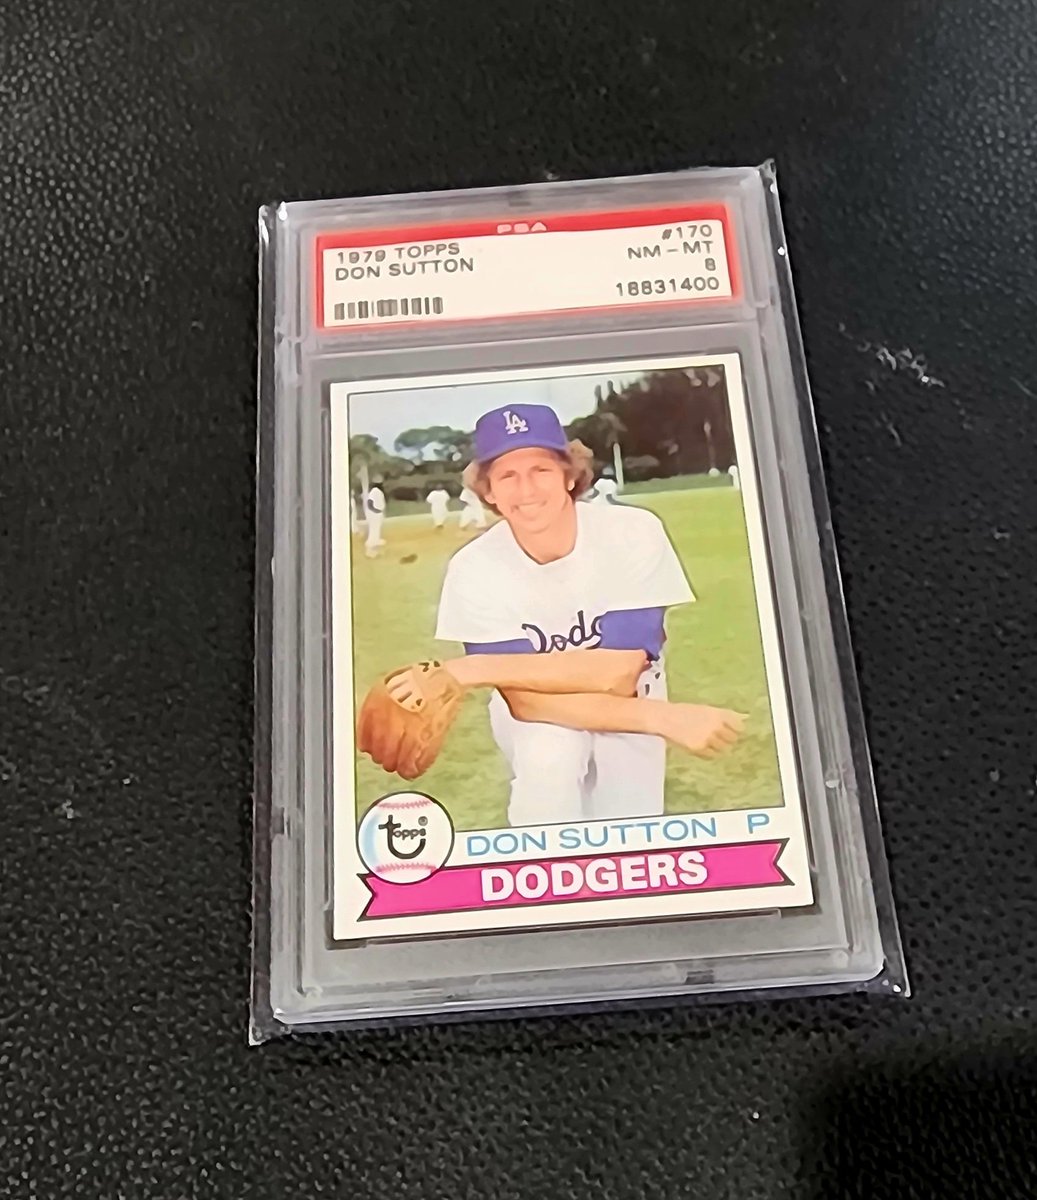 I received this amazing Don Sutton from @ArumsCards after the one I purchased was destroyed by the postal service. Thanks so much!!!